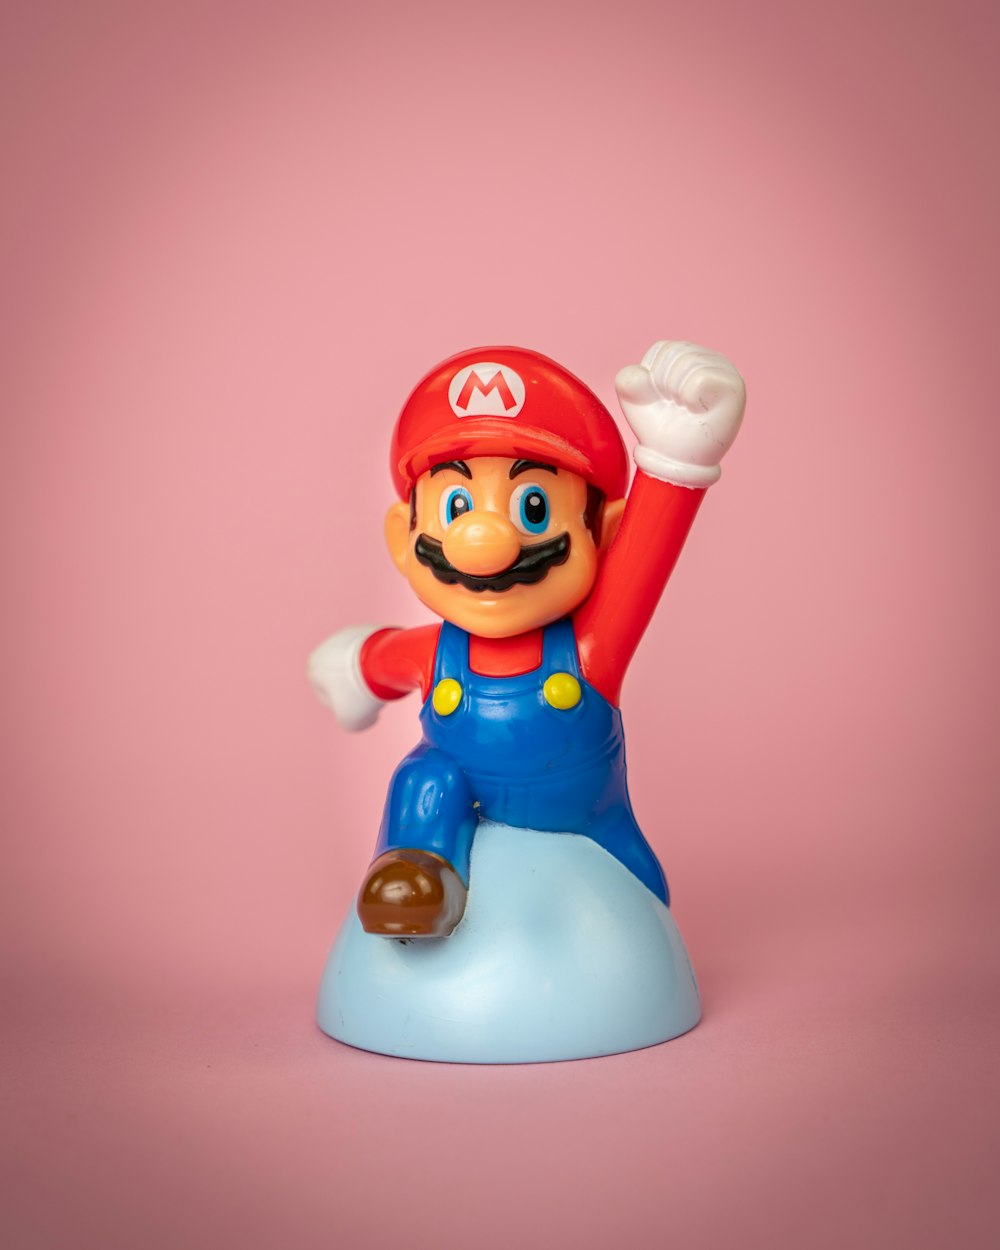 a toy figure of mario on top of a blue object